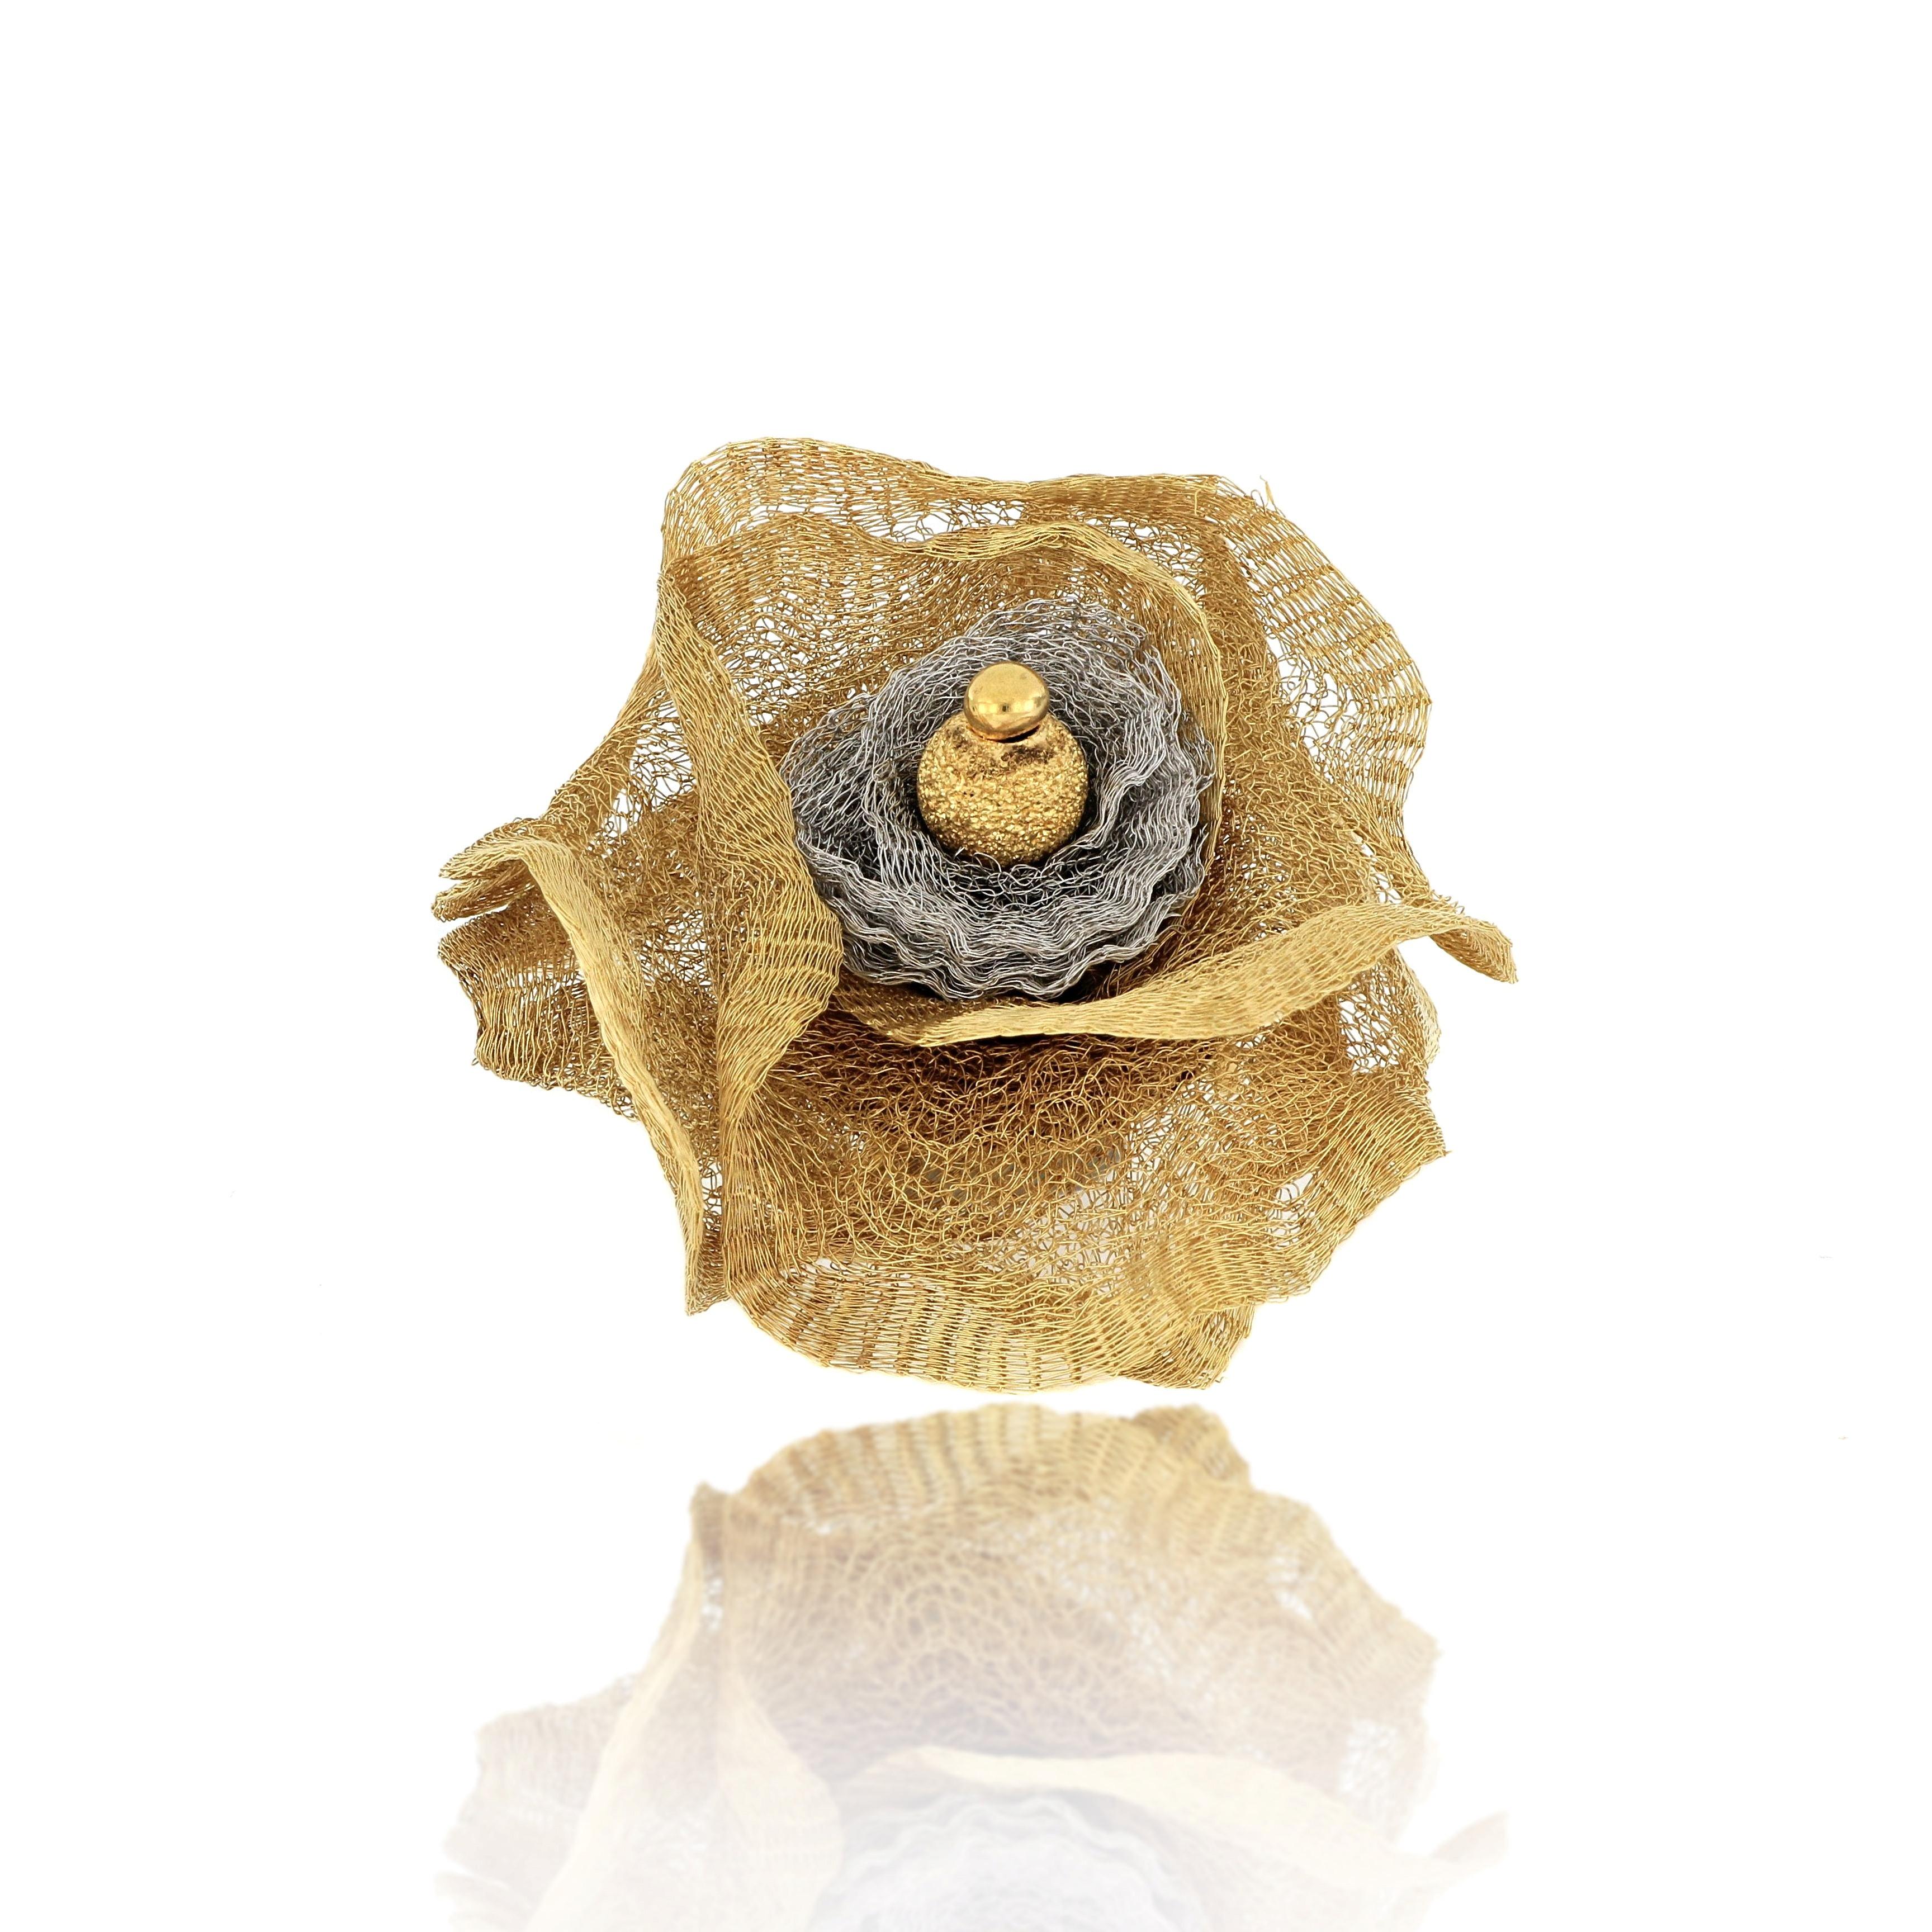 18 Karat Gold Brooch And Pendant. 
An extraordinary gold mesh Rose Shape Brooch And Pendant, with 18 Karat yellow and black gold thread woven and handmade in Italy.
O’Che 1867 was founded one and a half centuries ago in Macau. The brand is renowned